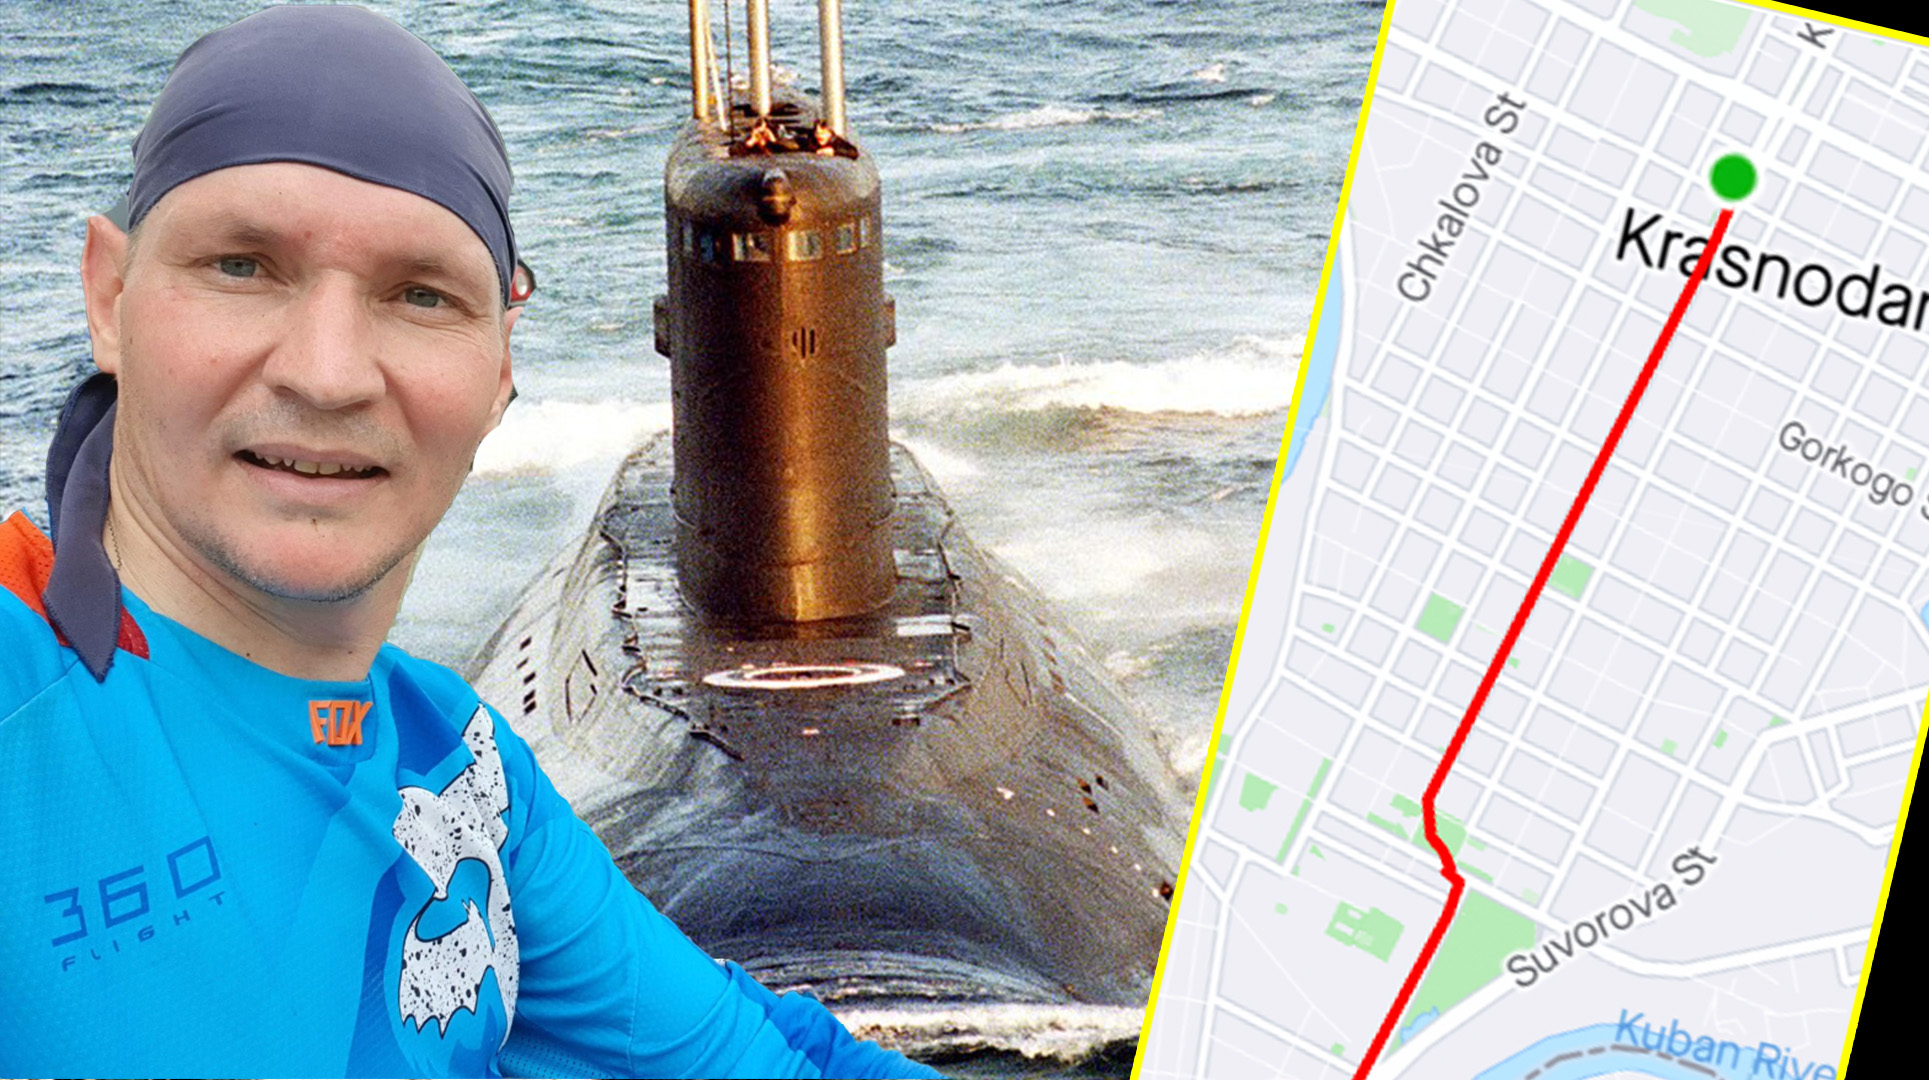 Did Ukraine just assassinate a Russian submarine captain with his own Strava?